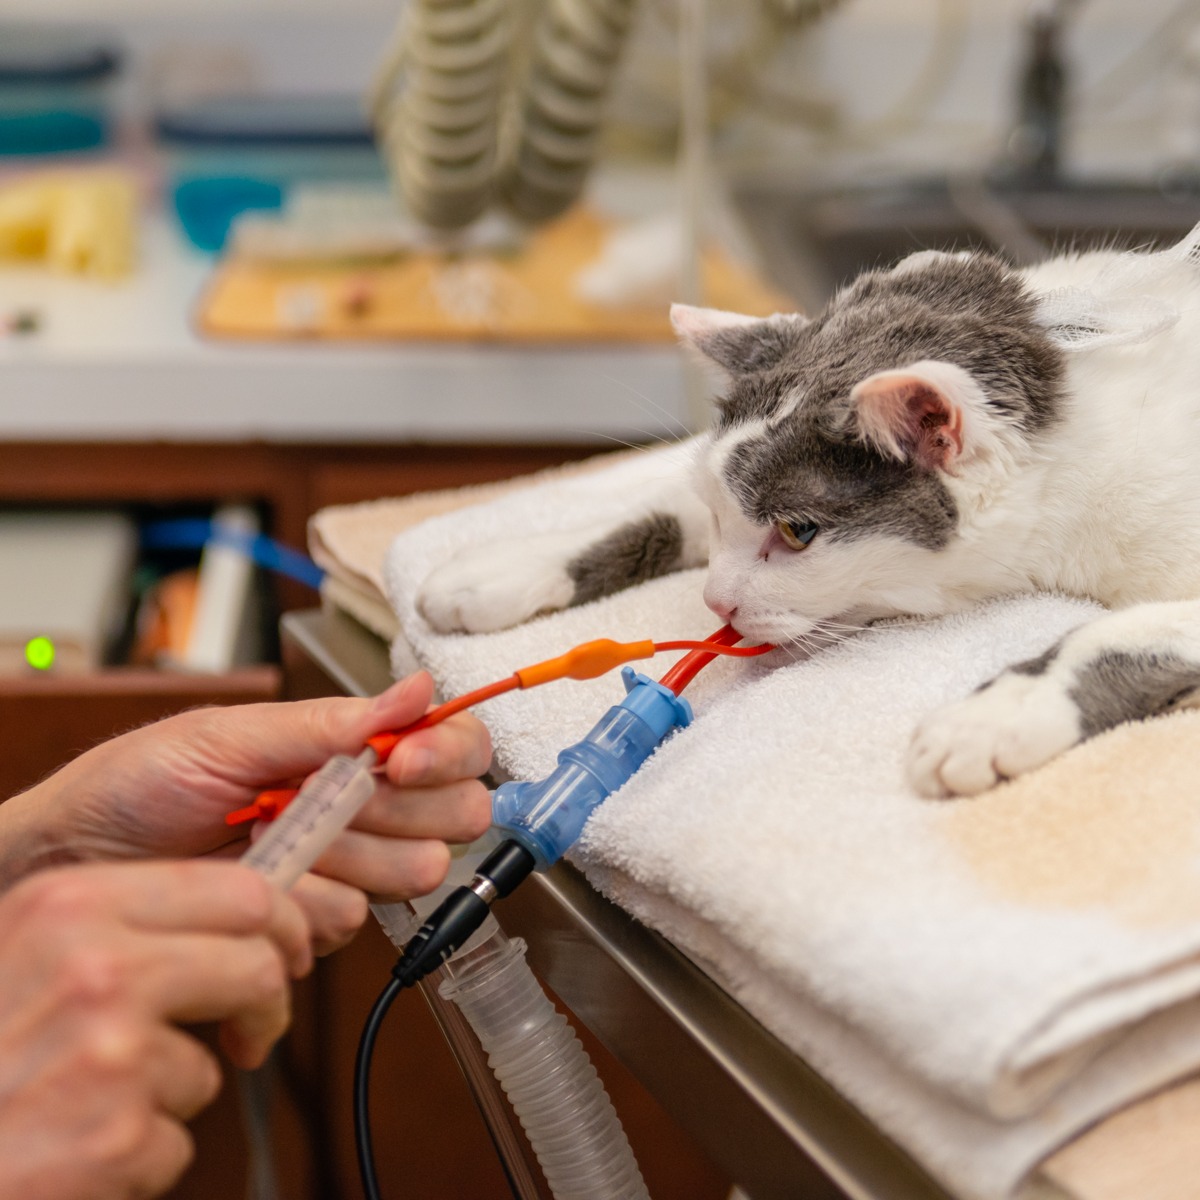 Cat during surgery